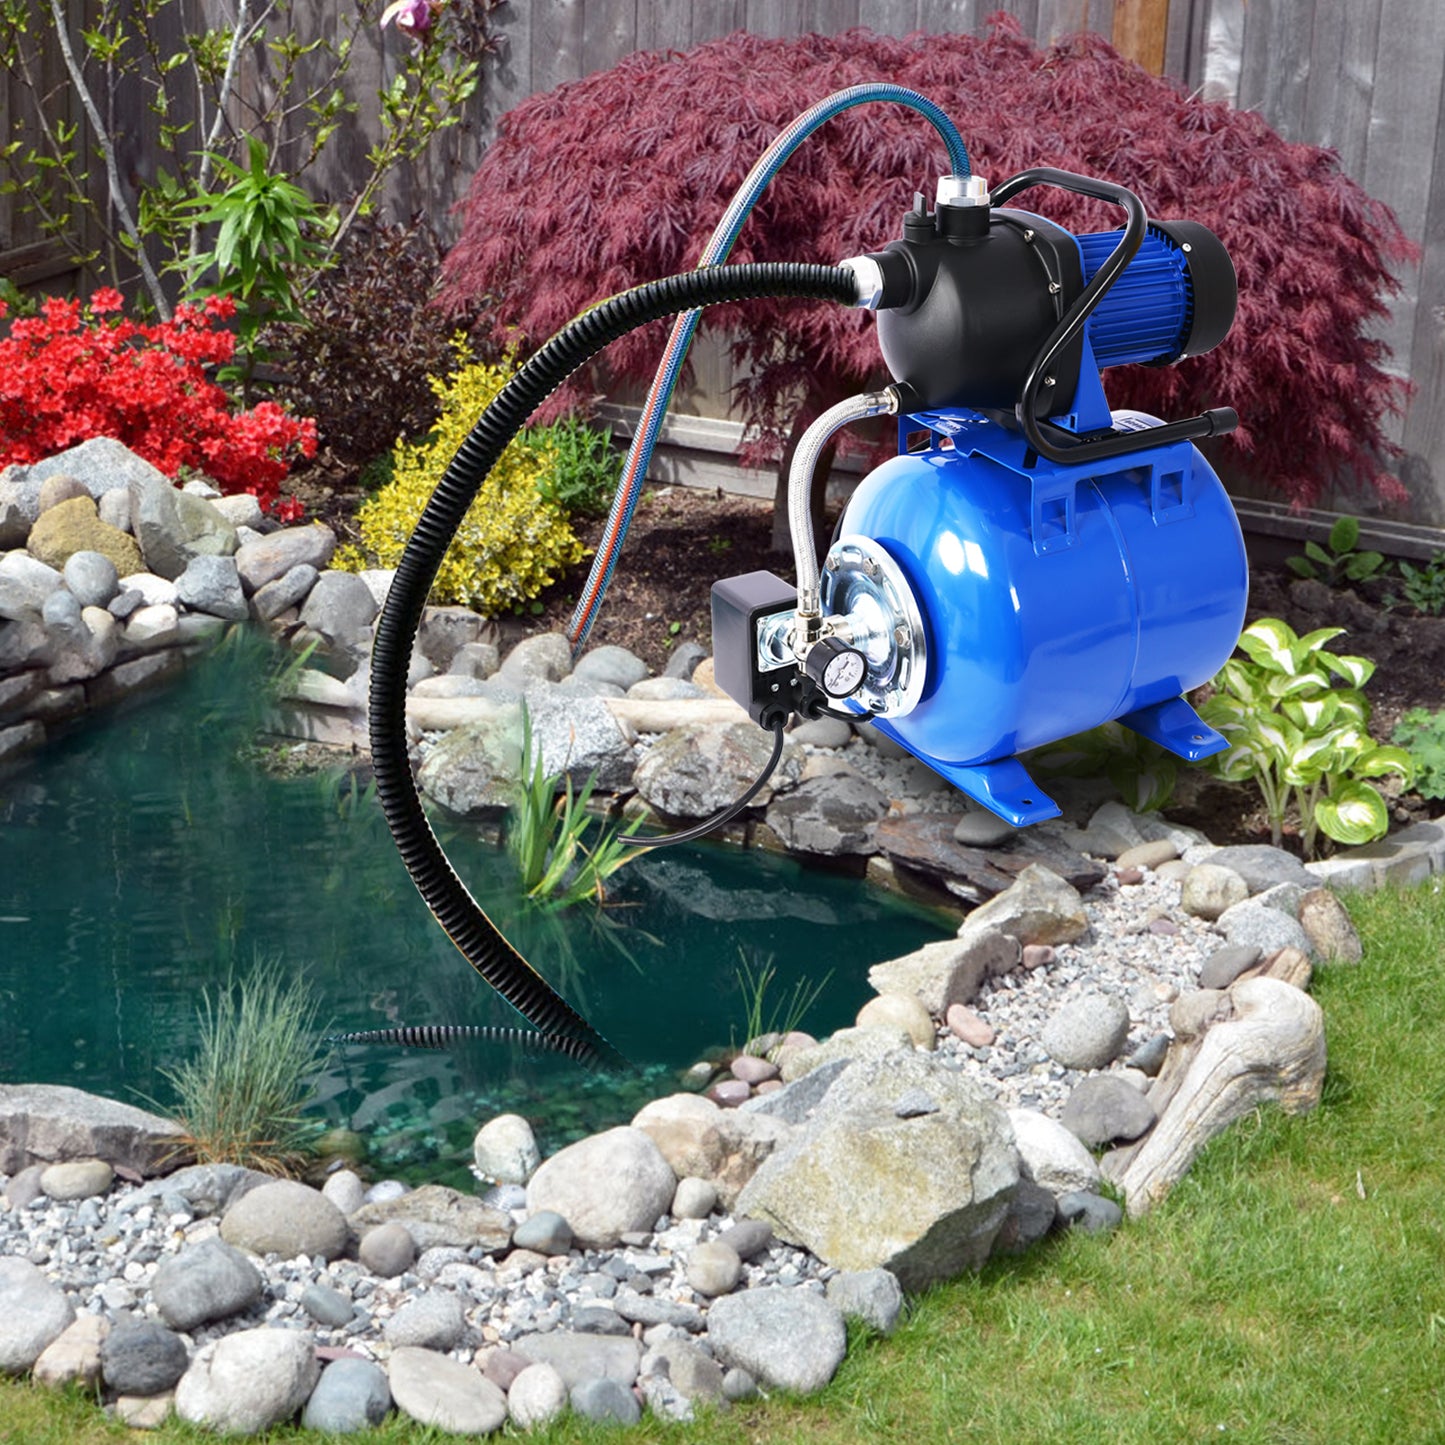 1.6HP Shallow Well Pump with Pressure Tank,garden water pump, Irrigation Pump,Automatic Water Booster Pump for Home Garden Lawn Farm